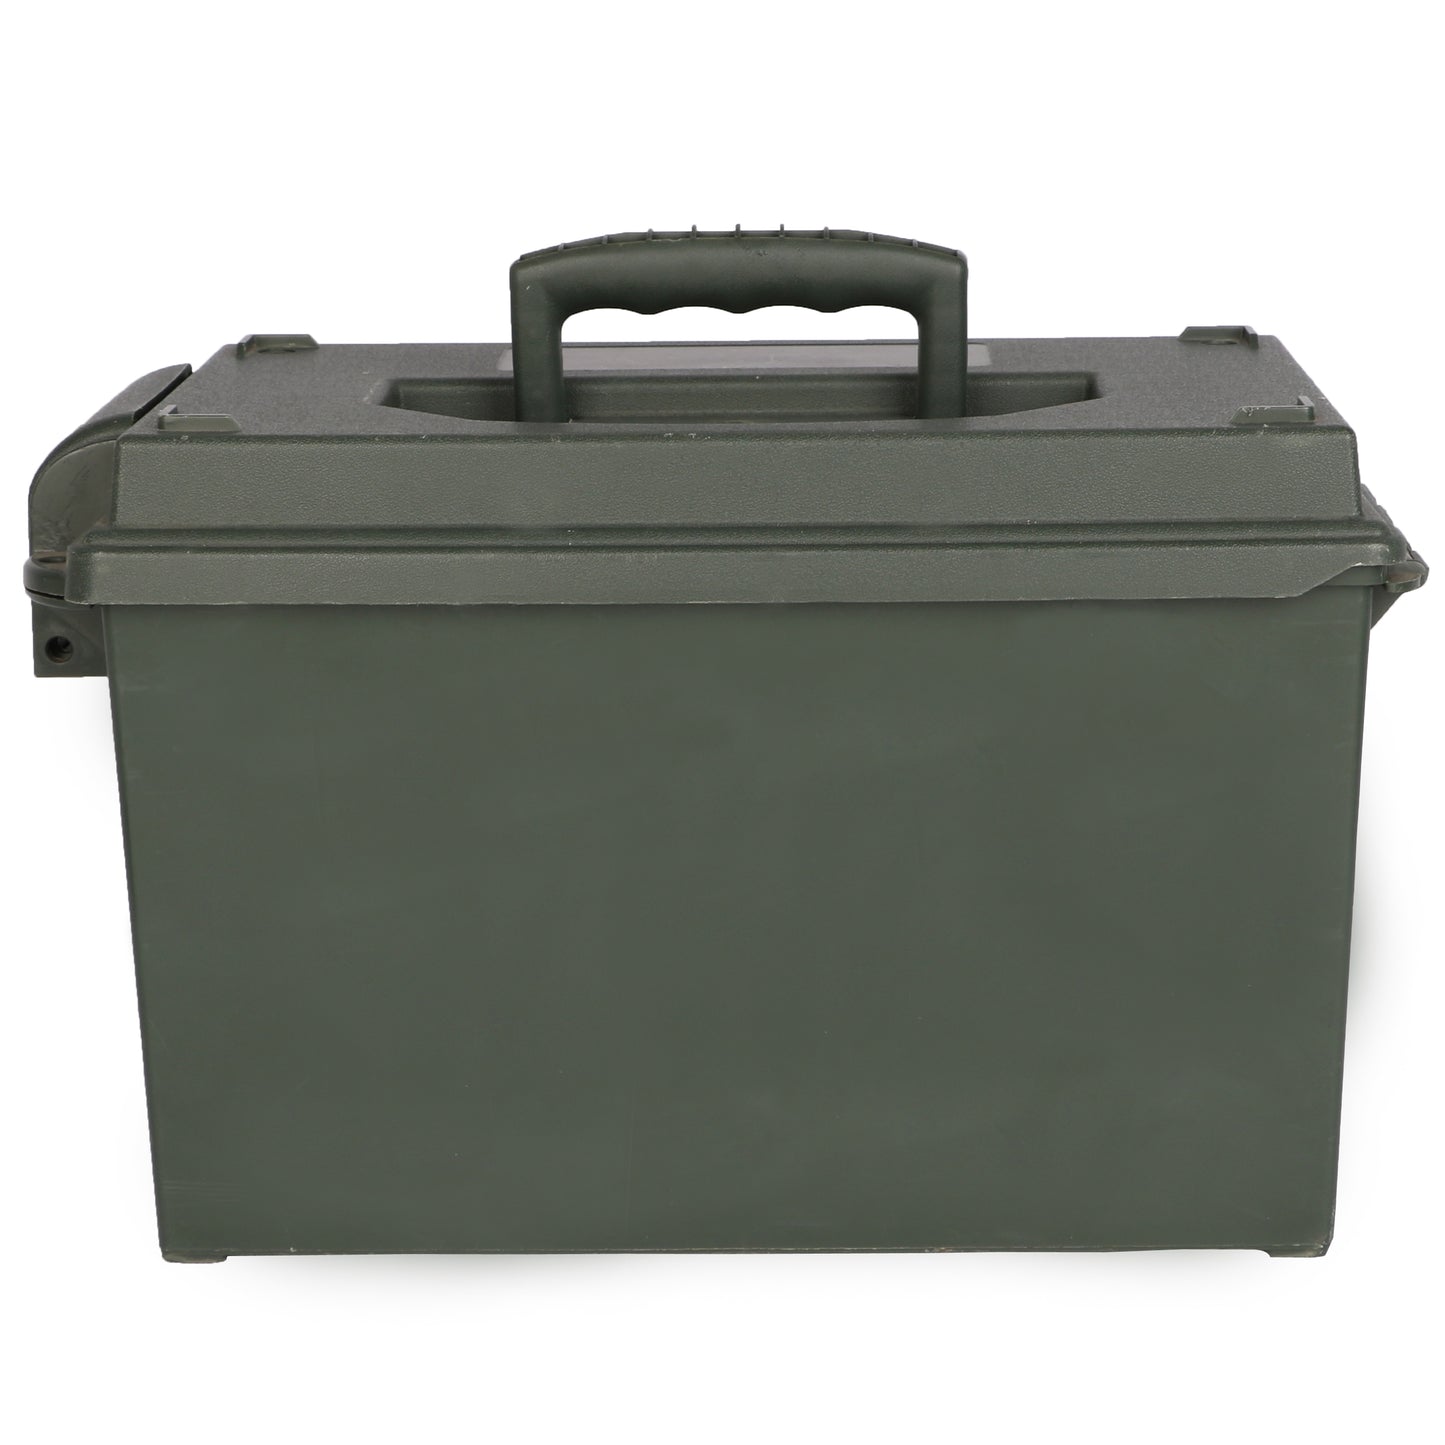 Lockable Lightweight Carry Ammo Can